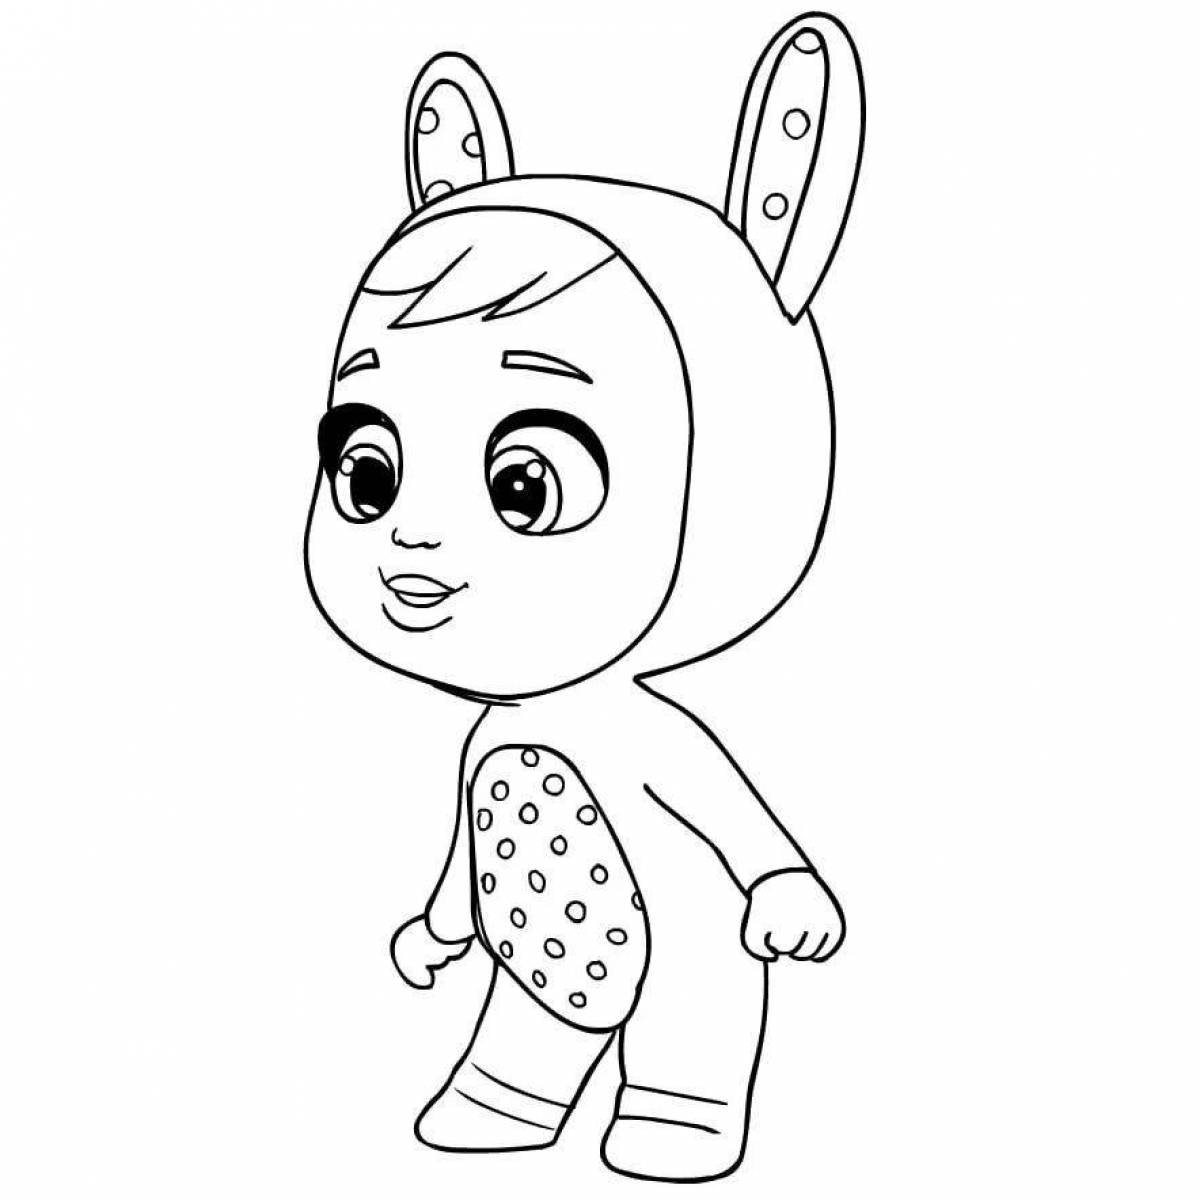 Charming edge baby coloring book